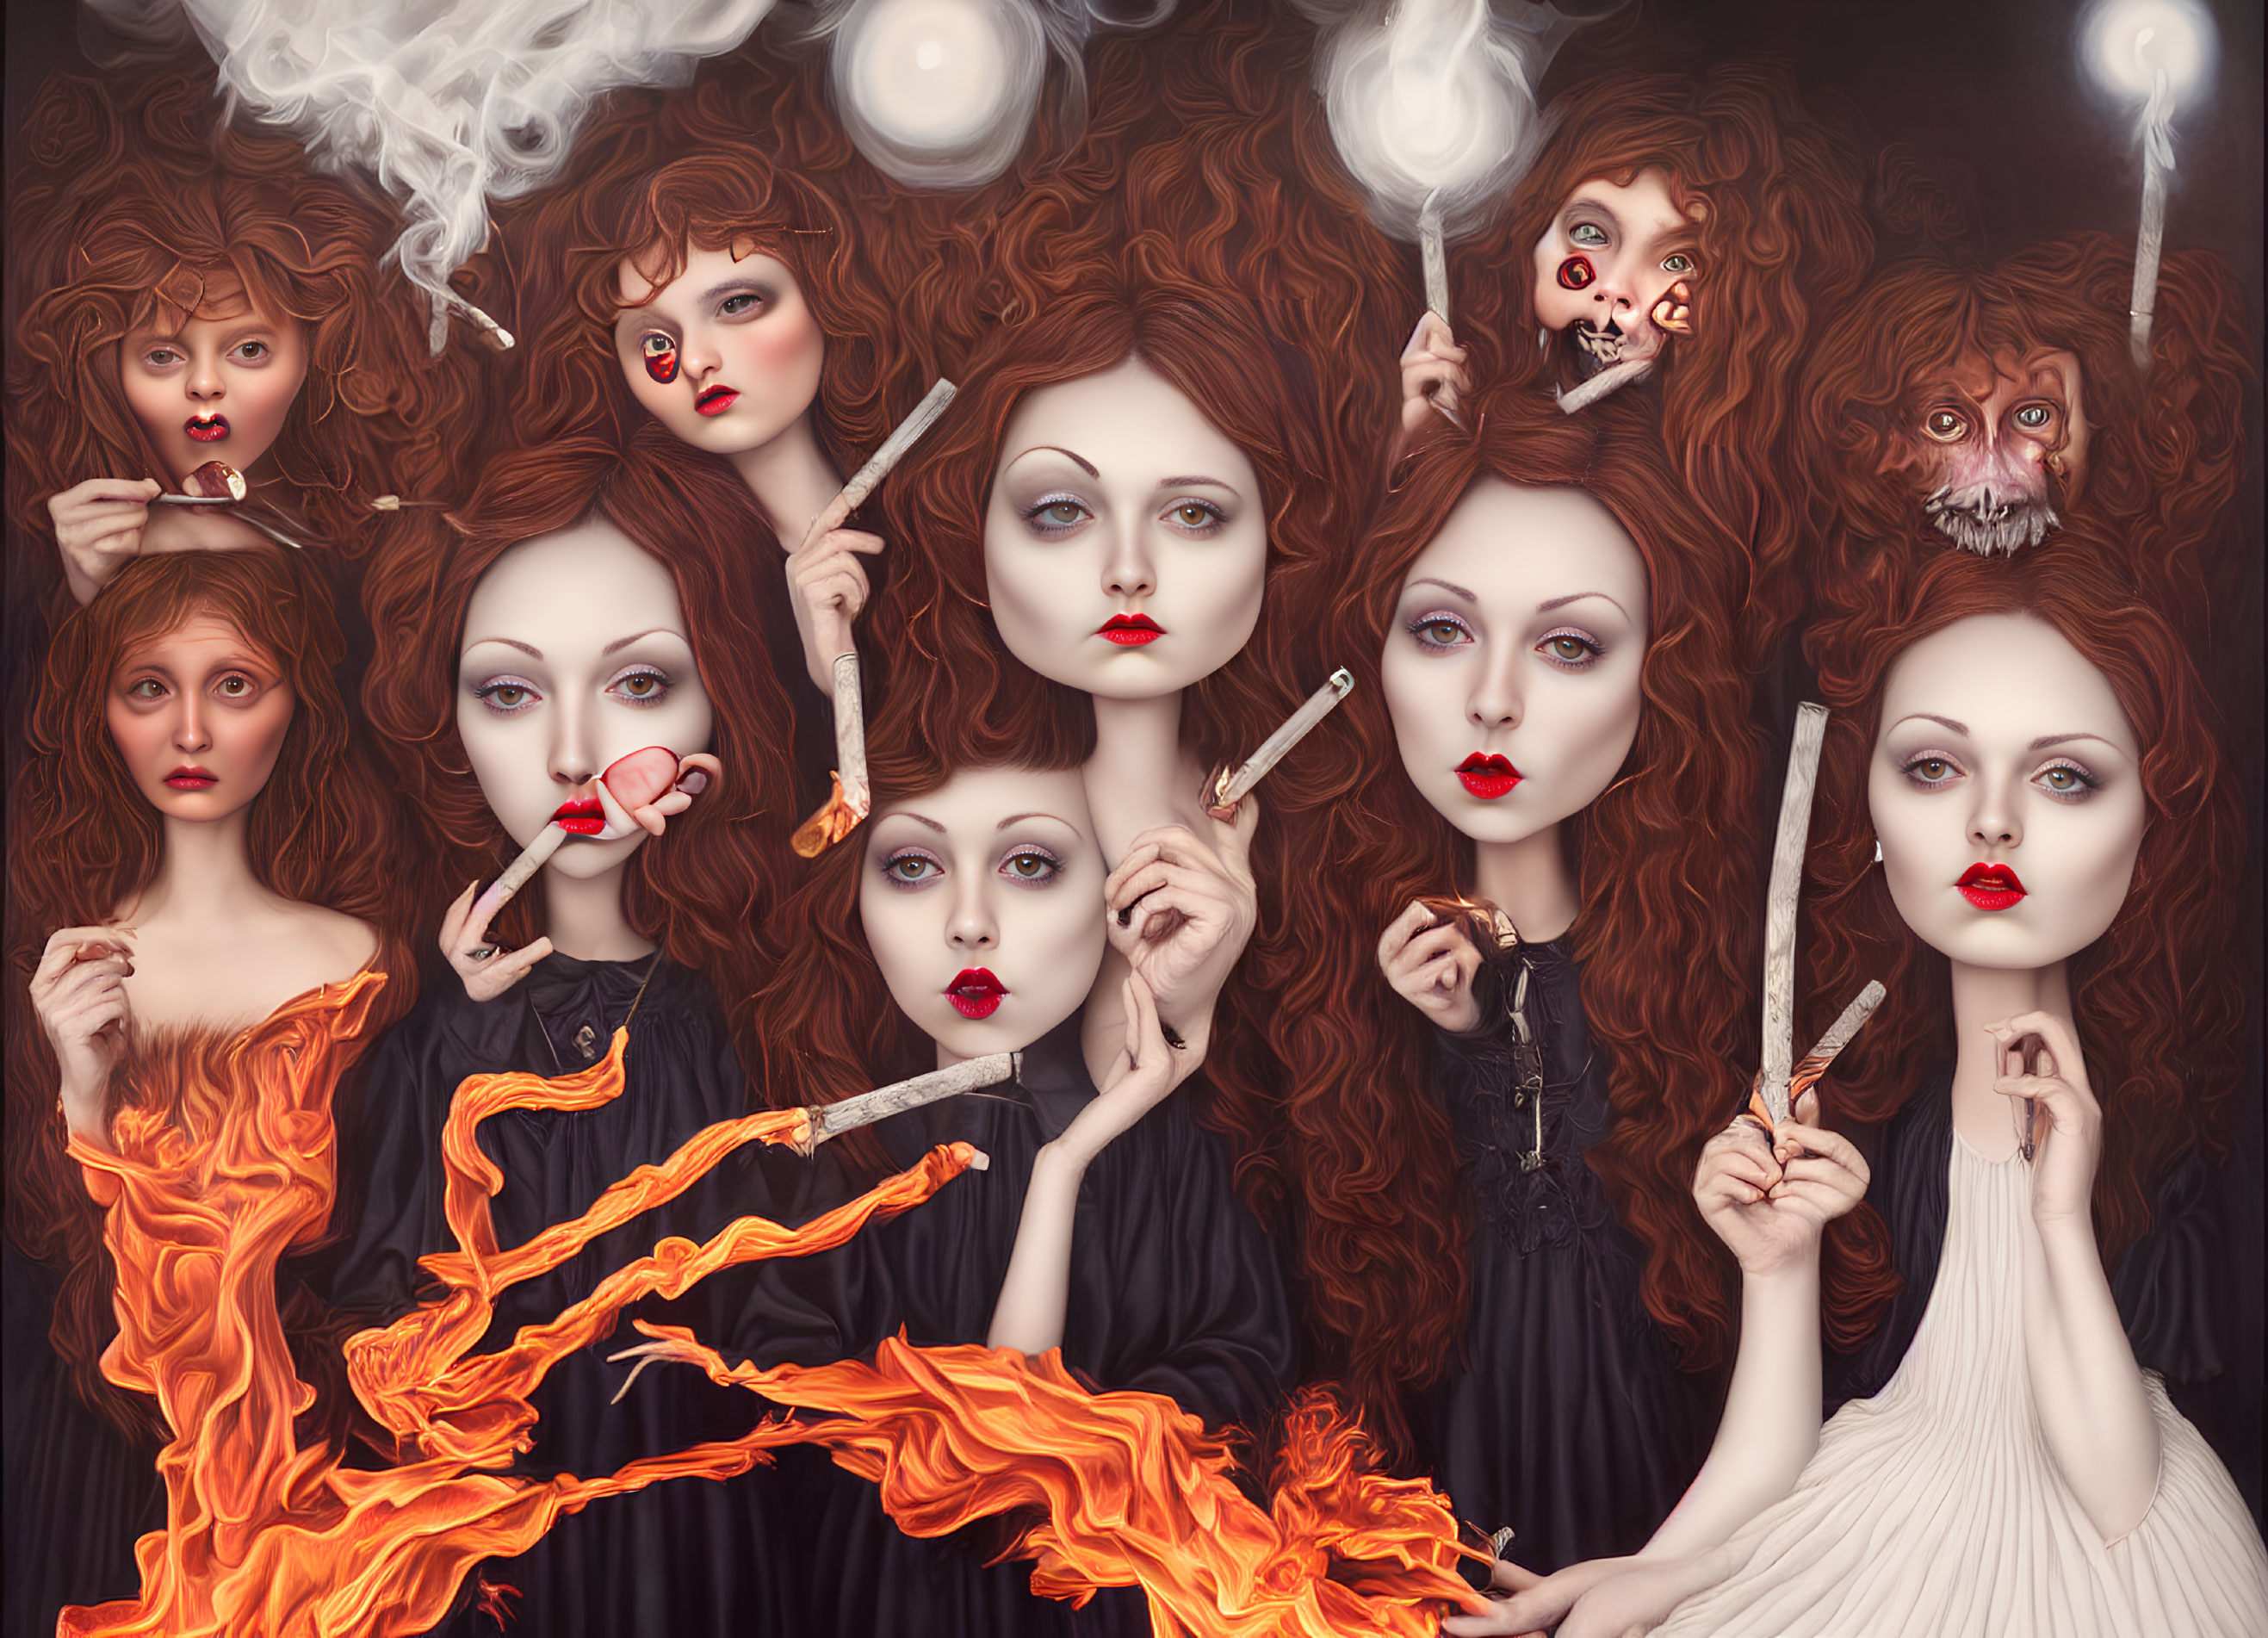 Surreal artwork featuring multiple female faces, hands with cigarettes, flowing hair, and a figure engulf